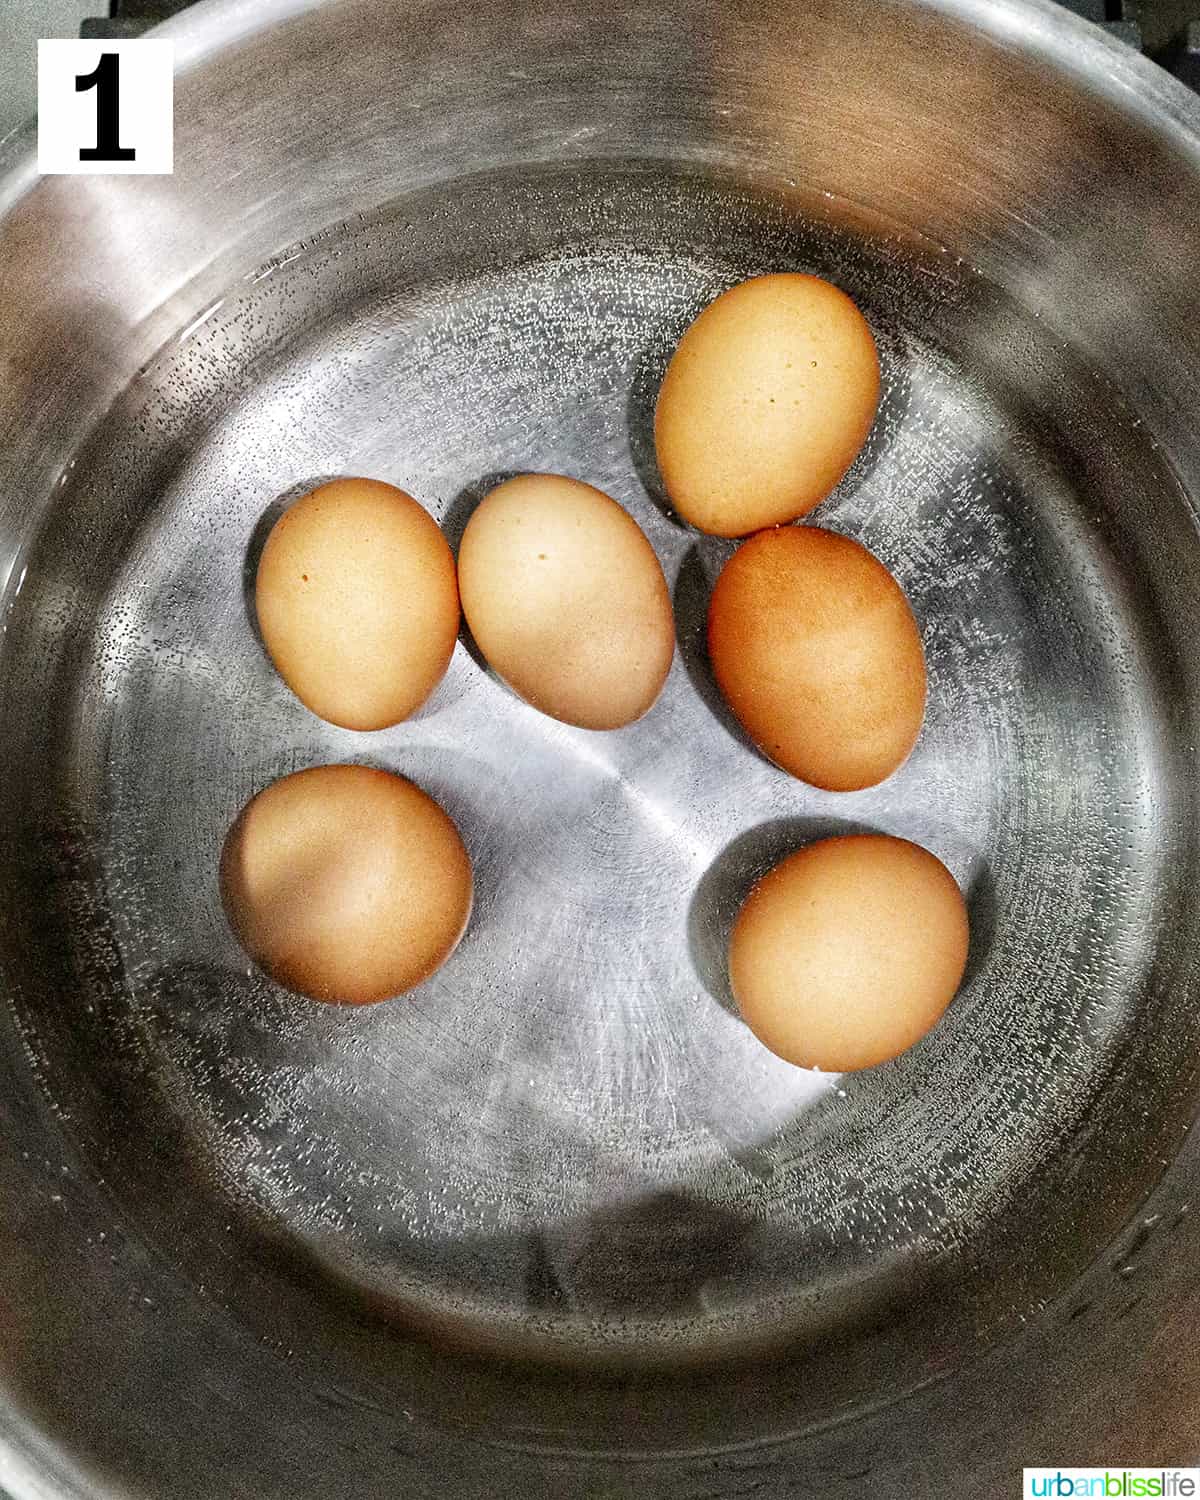 several brown eggs in a saucepan with water.